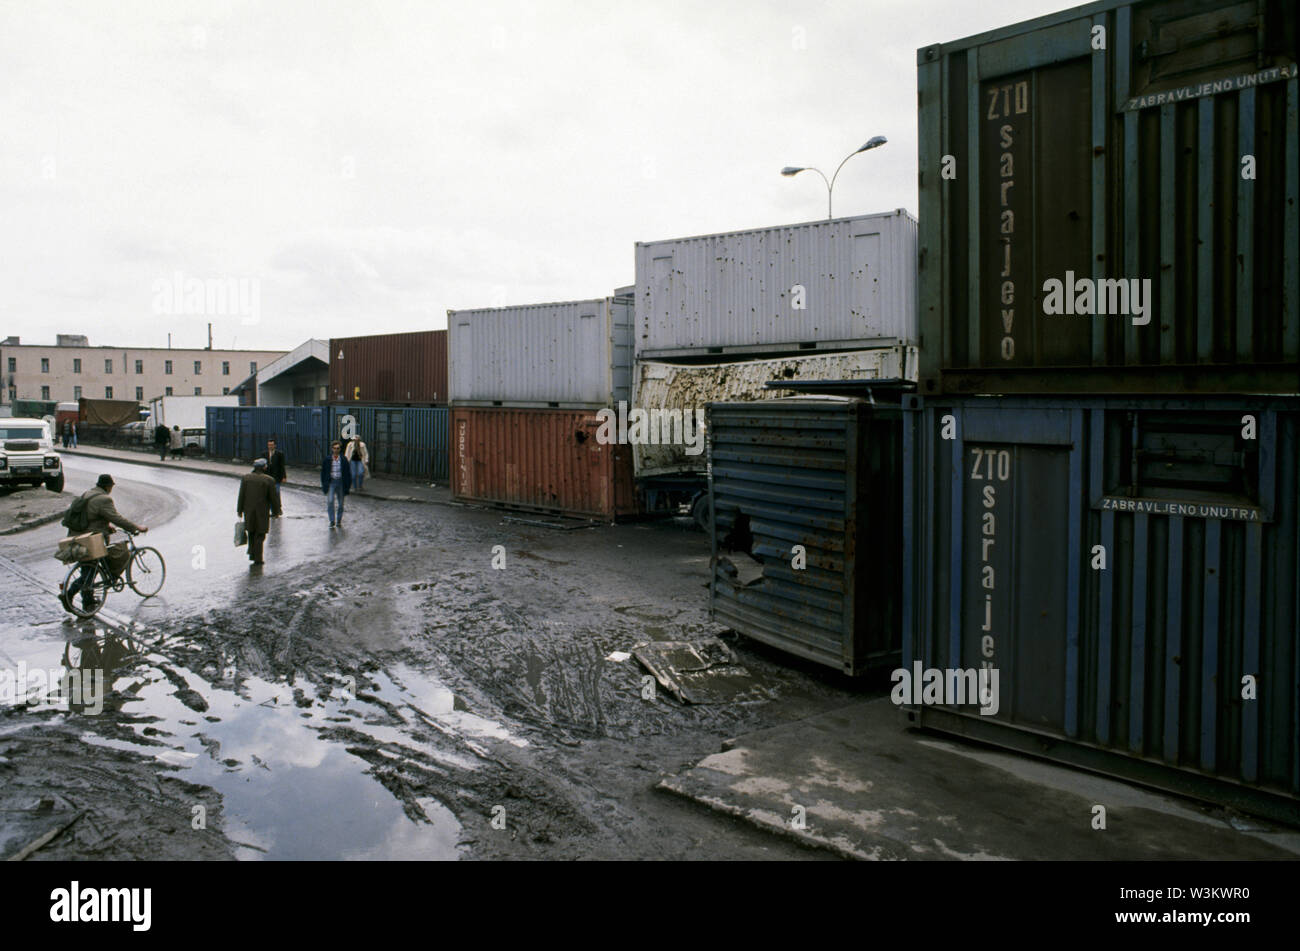 11th April 1993 During the Siege of Sarajevo: local people walk past shrapnel-ridden containers that act as a sniper screen across Hamdije Cemerlica at the junction with Put zivota (known as Bratstva i jedinstva and Krusevacka during the war). Stock Photo